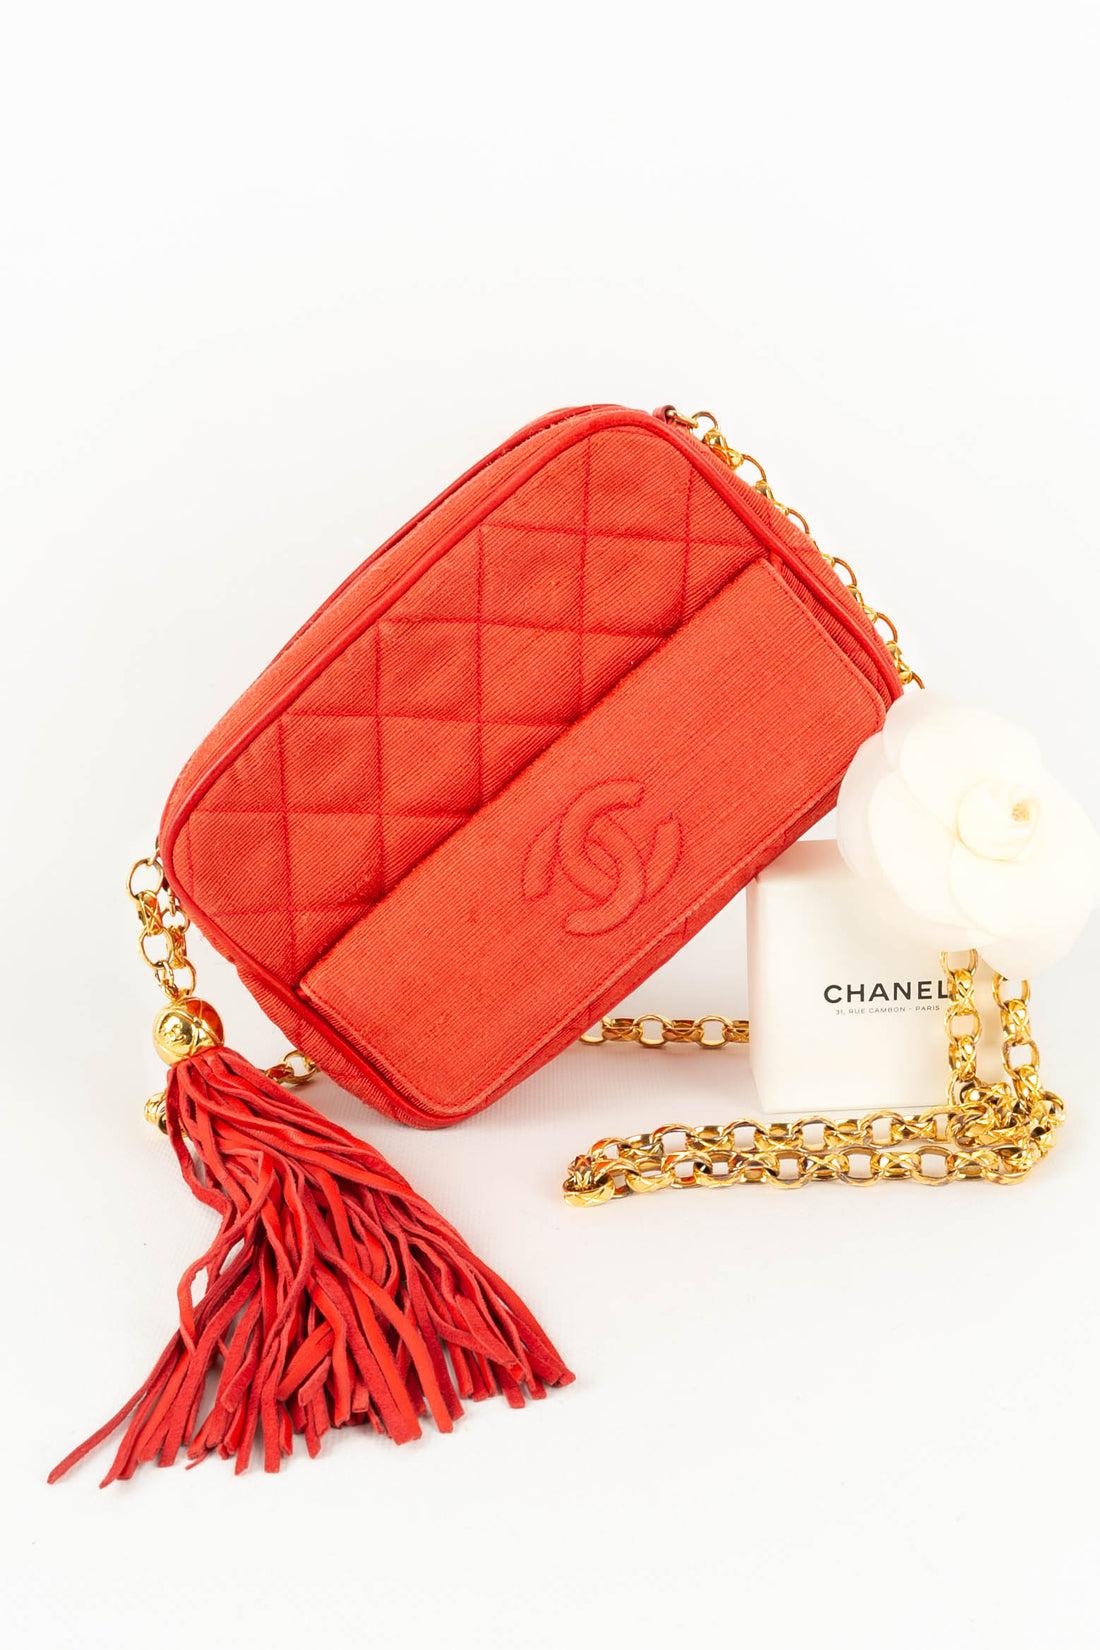 Chanel Red Quilted Cotton Bag, 1989/1991 9